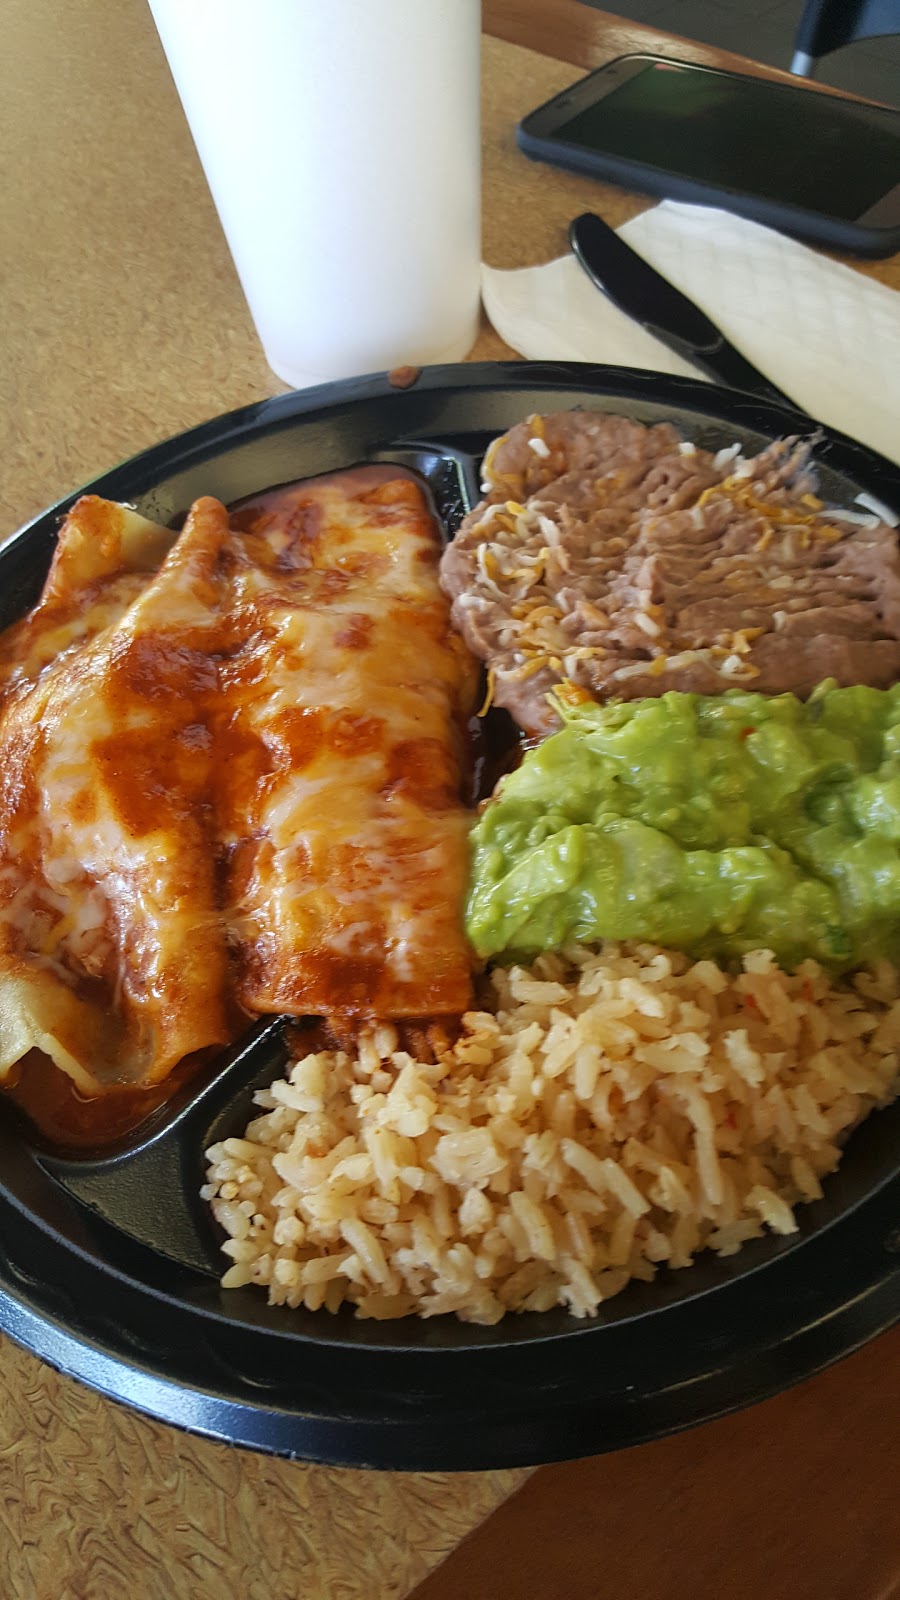 Pepes Finest Mexican Food | 1140 N Azusa Ave, Covina, CA 91722 | Phone: (626) 966-8185